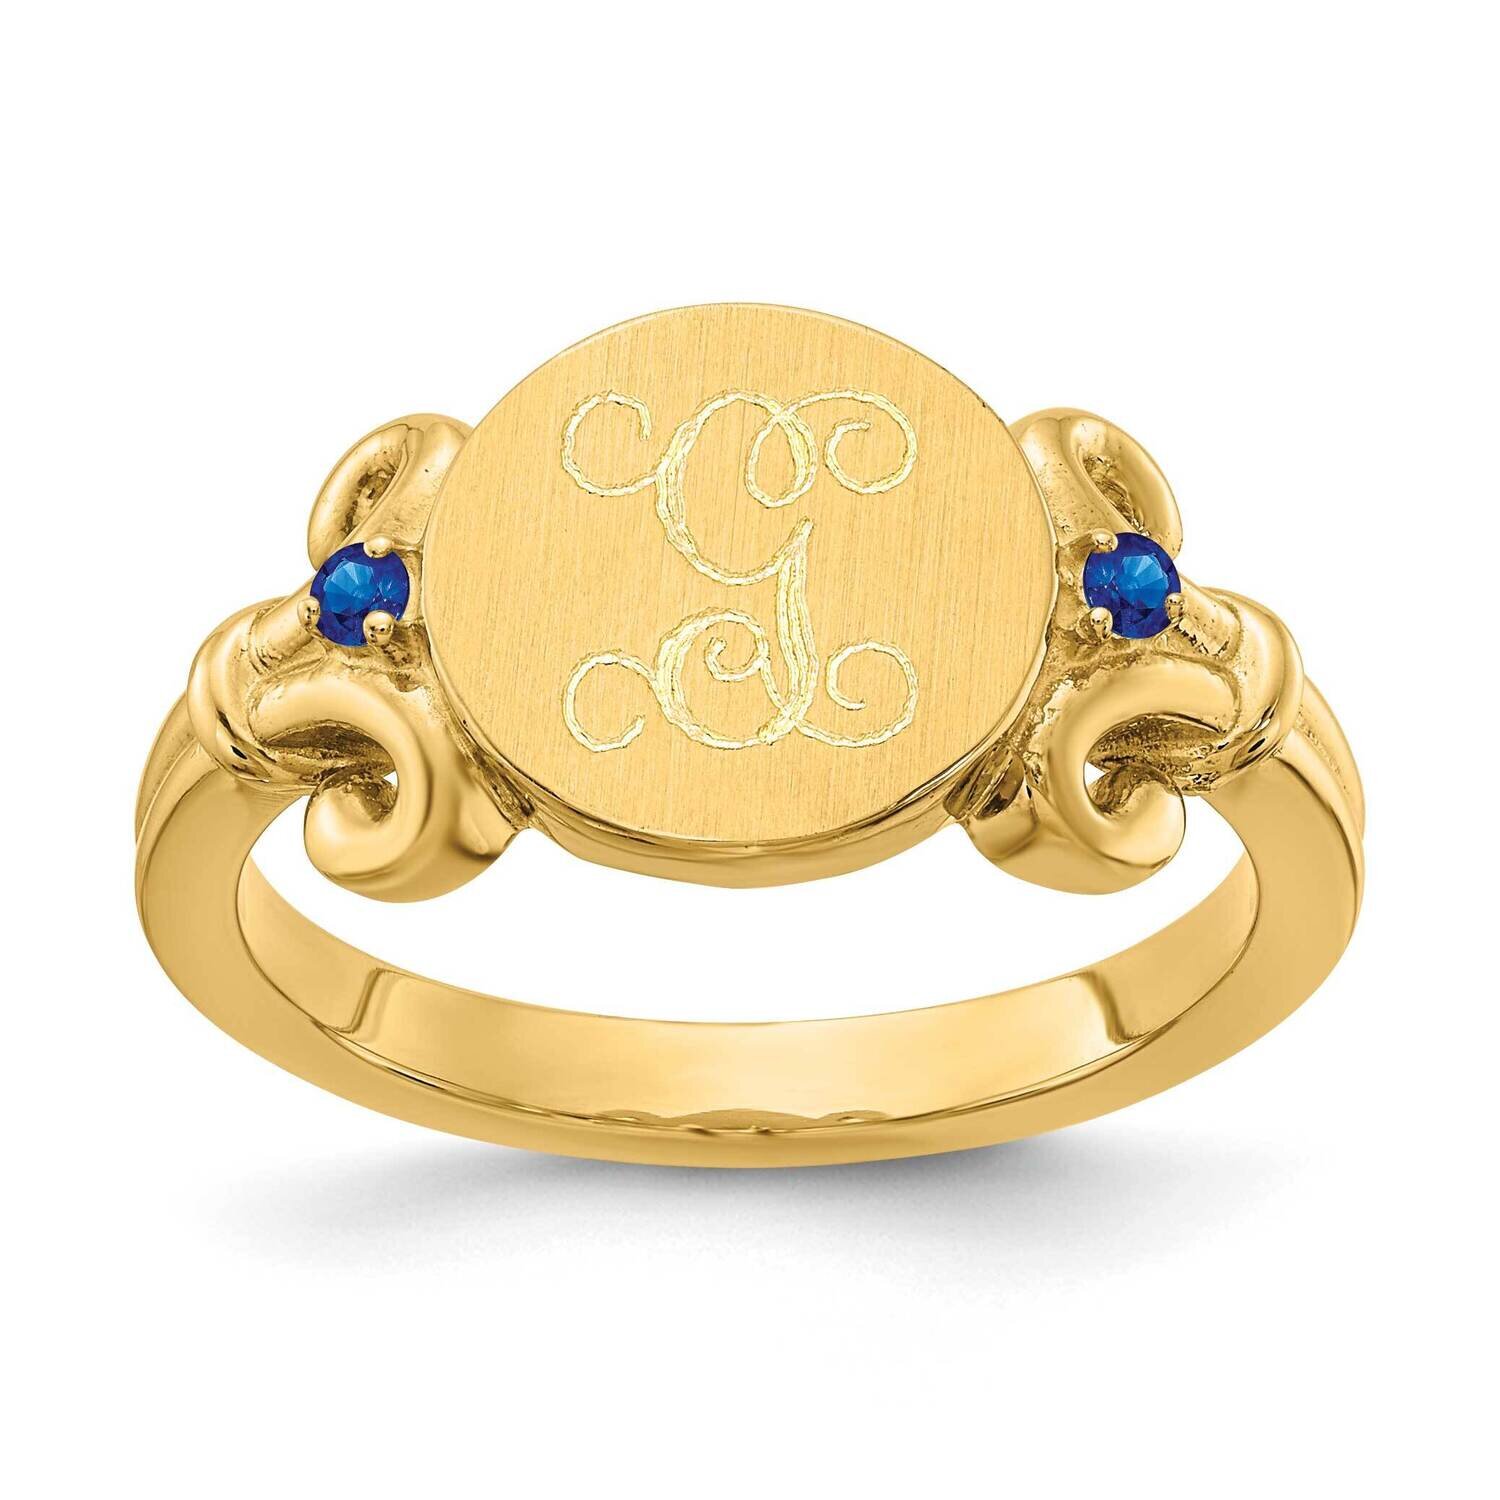 Fancy Ring with Birthstones with Engraving 14k Gold XNR84Y